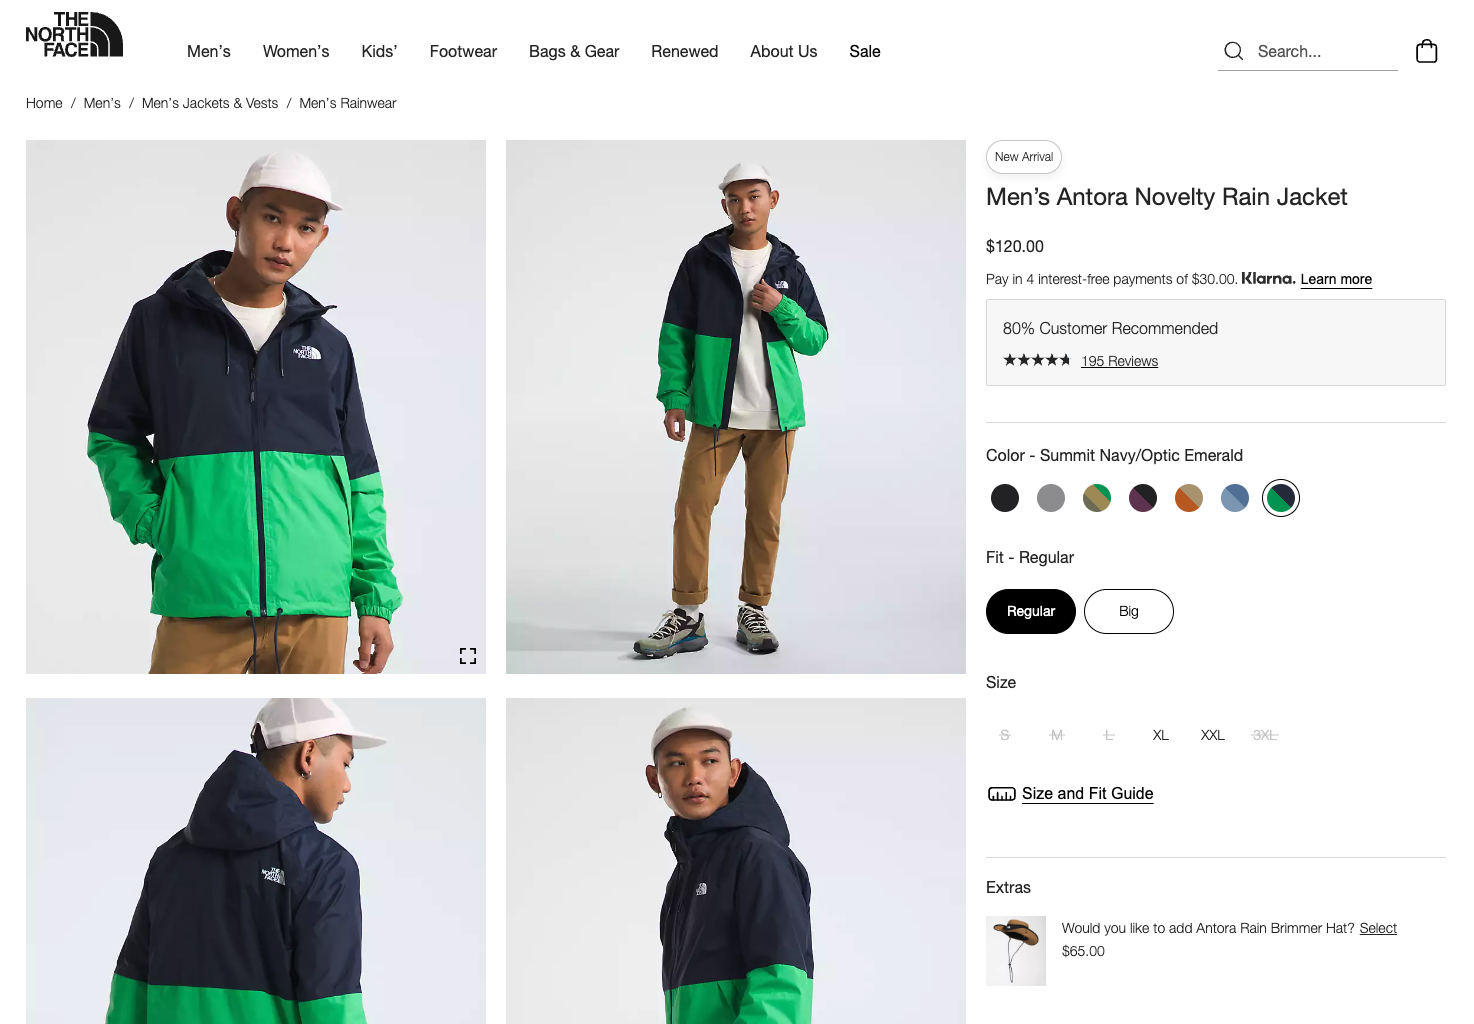 High-quality product image examples of men’s jacket from The North Face